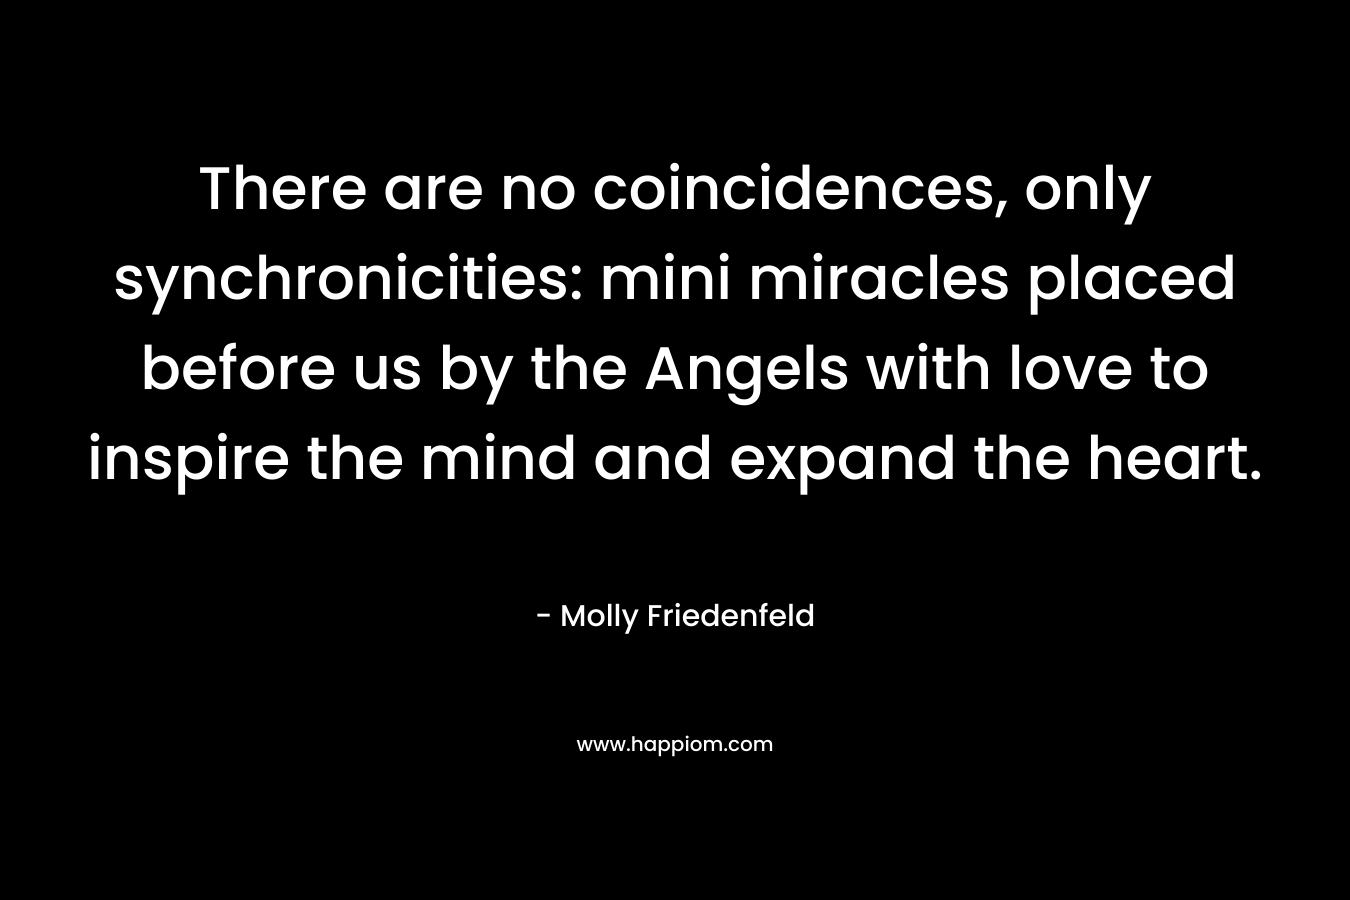 There are no coincidences, only synchronicities: mini miracles placed before us by the Angels with love to inspire the mind and expand the heart.